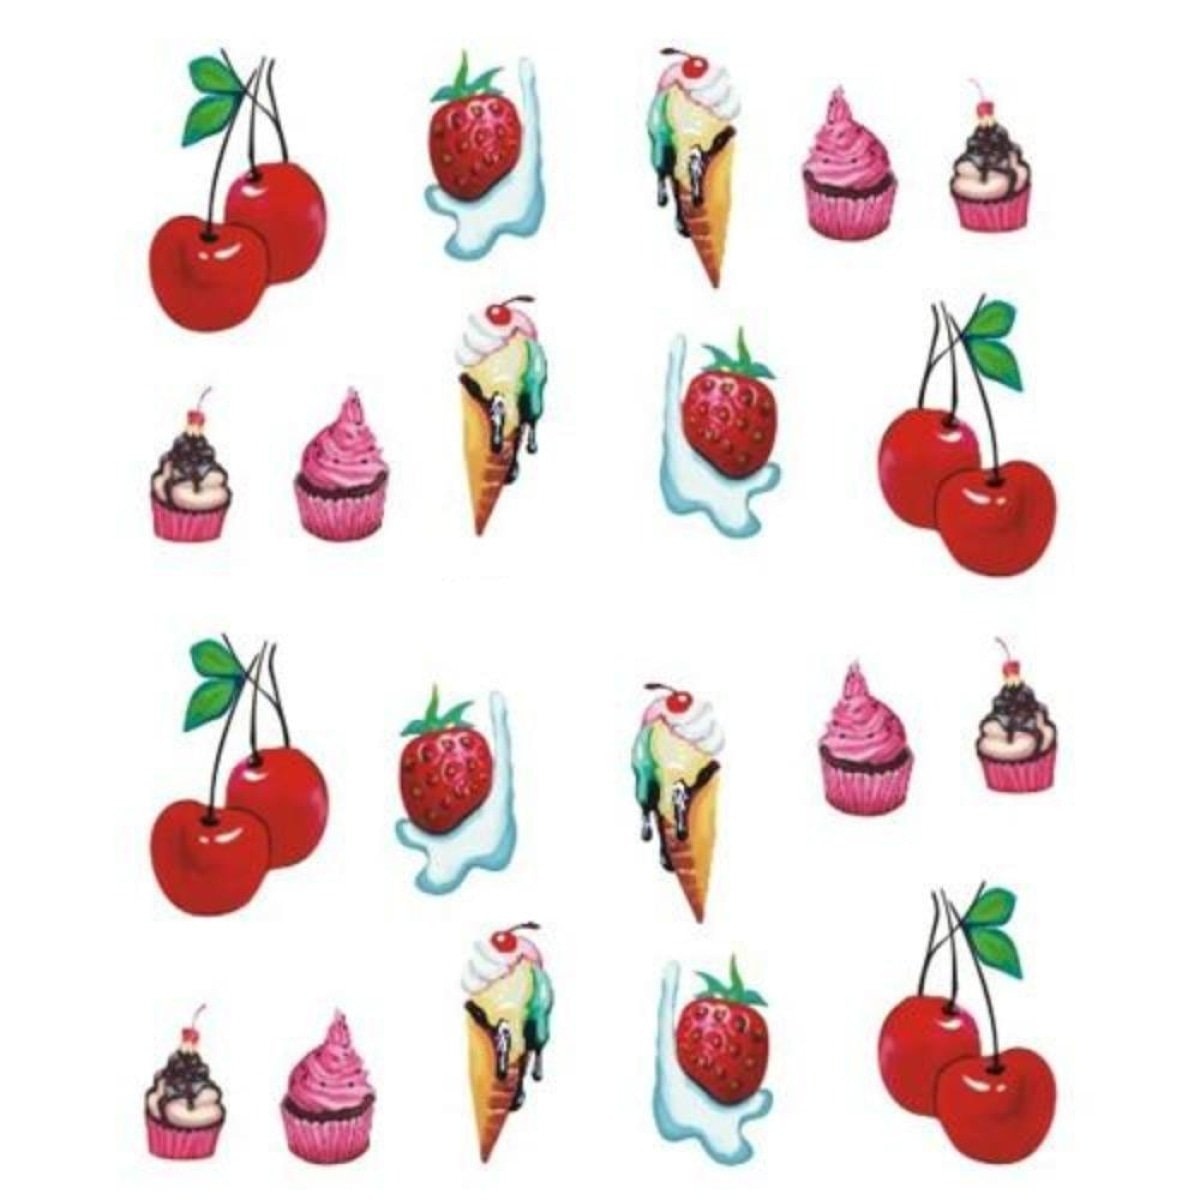 Strawberry Summer Cake & Fruit Stickers For Nails Nail Manicure Art Stz-496 - Sheet